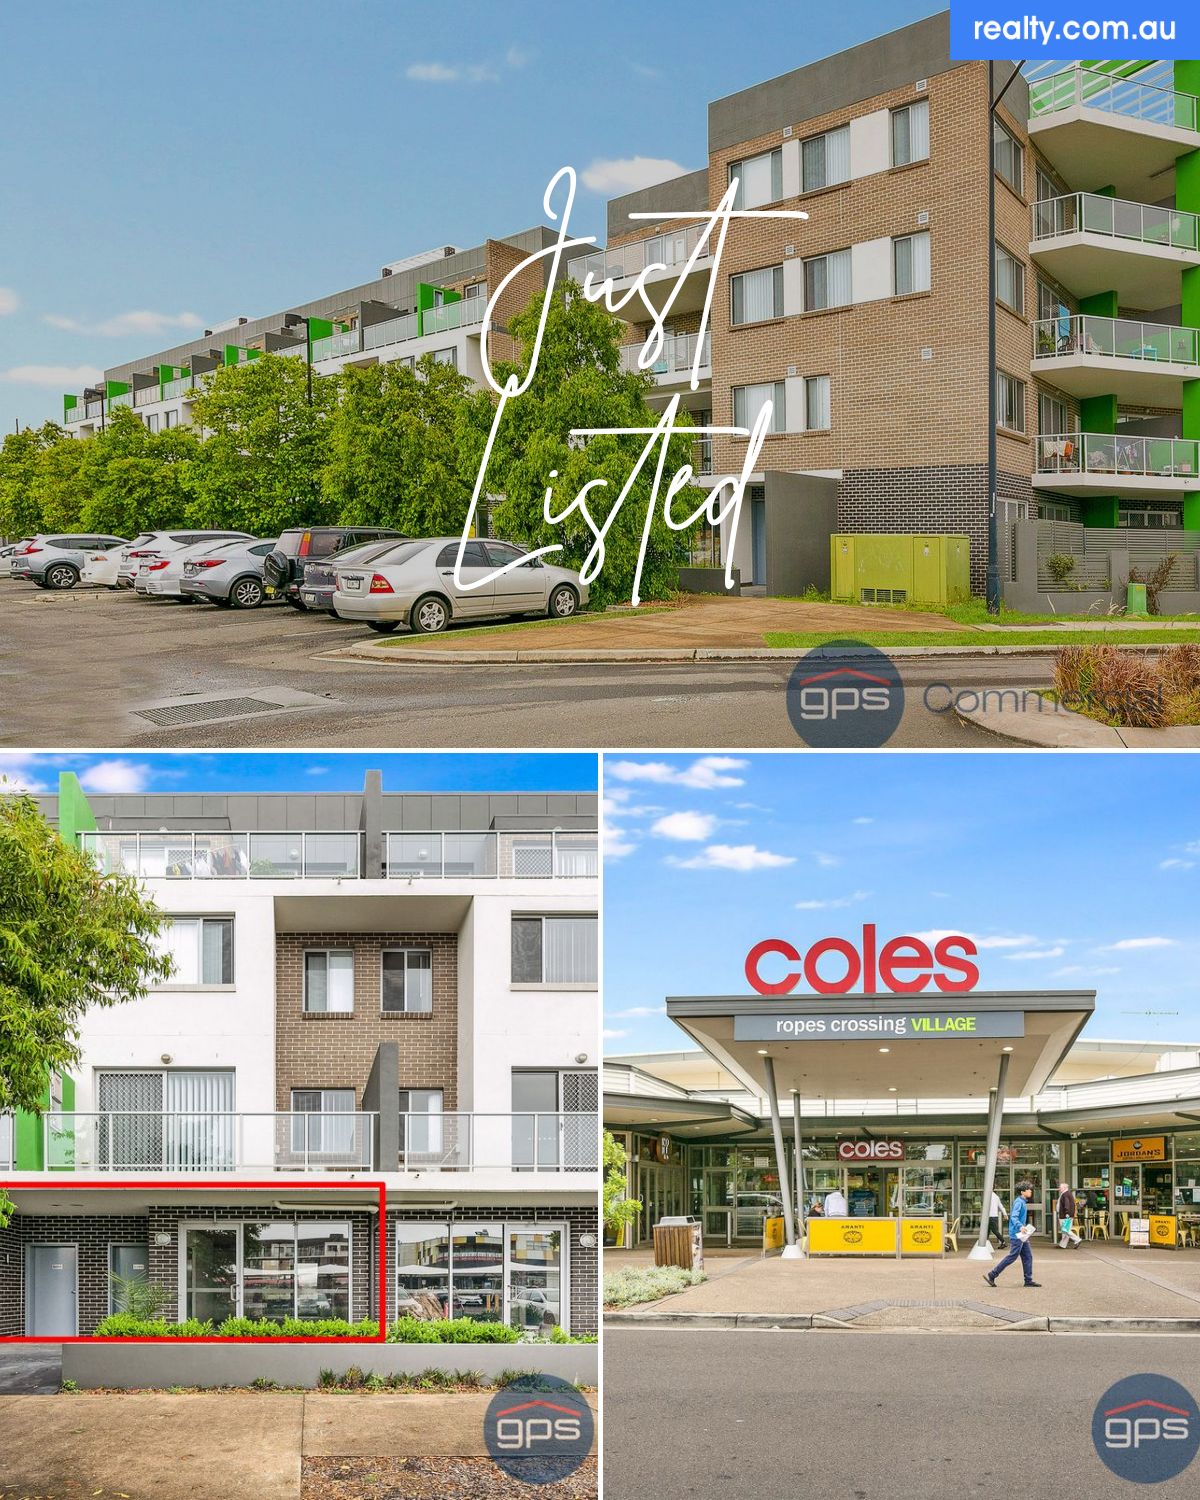 Shop G3/80B Ropes Crossing Boulevard, Ropes Crossing, NSW 2760 | Realty.com.au